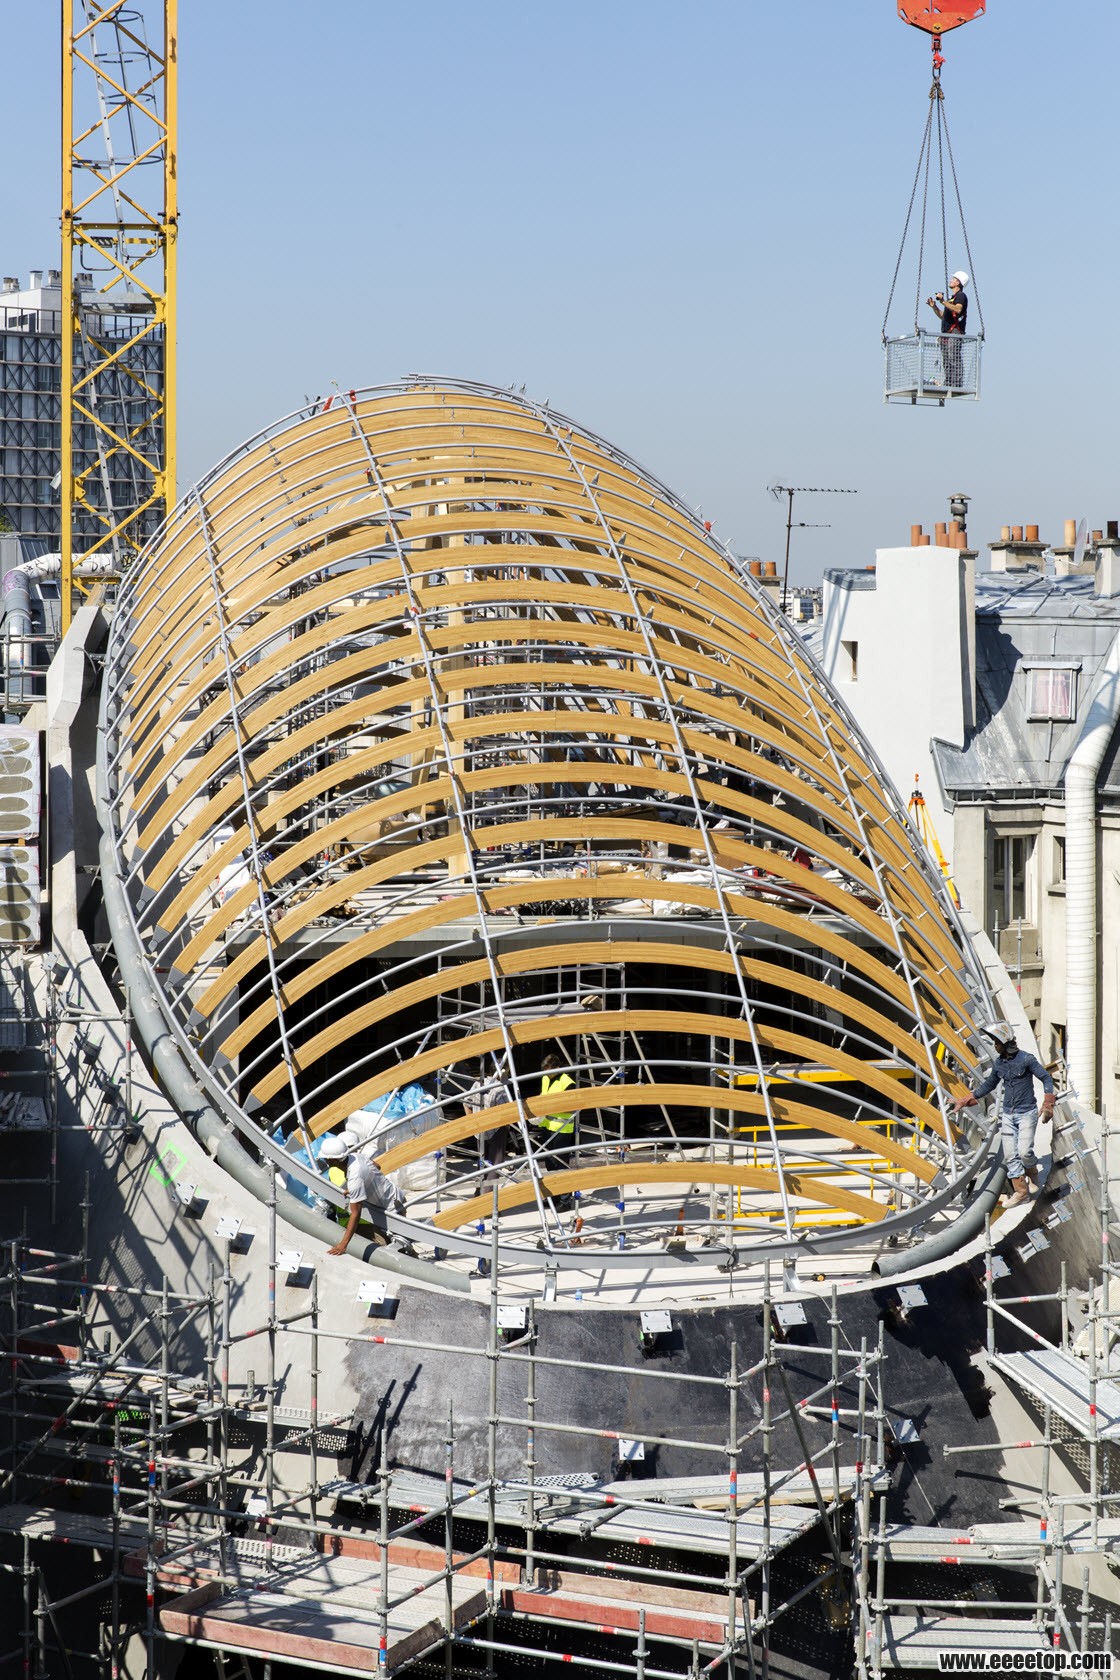 Eؽ_Pathe-Foundation-installation-in-Paris-by-Renzo-Piano_16.jpg